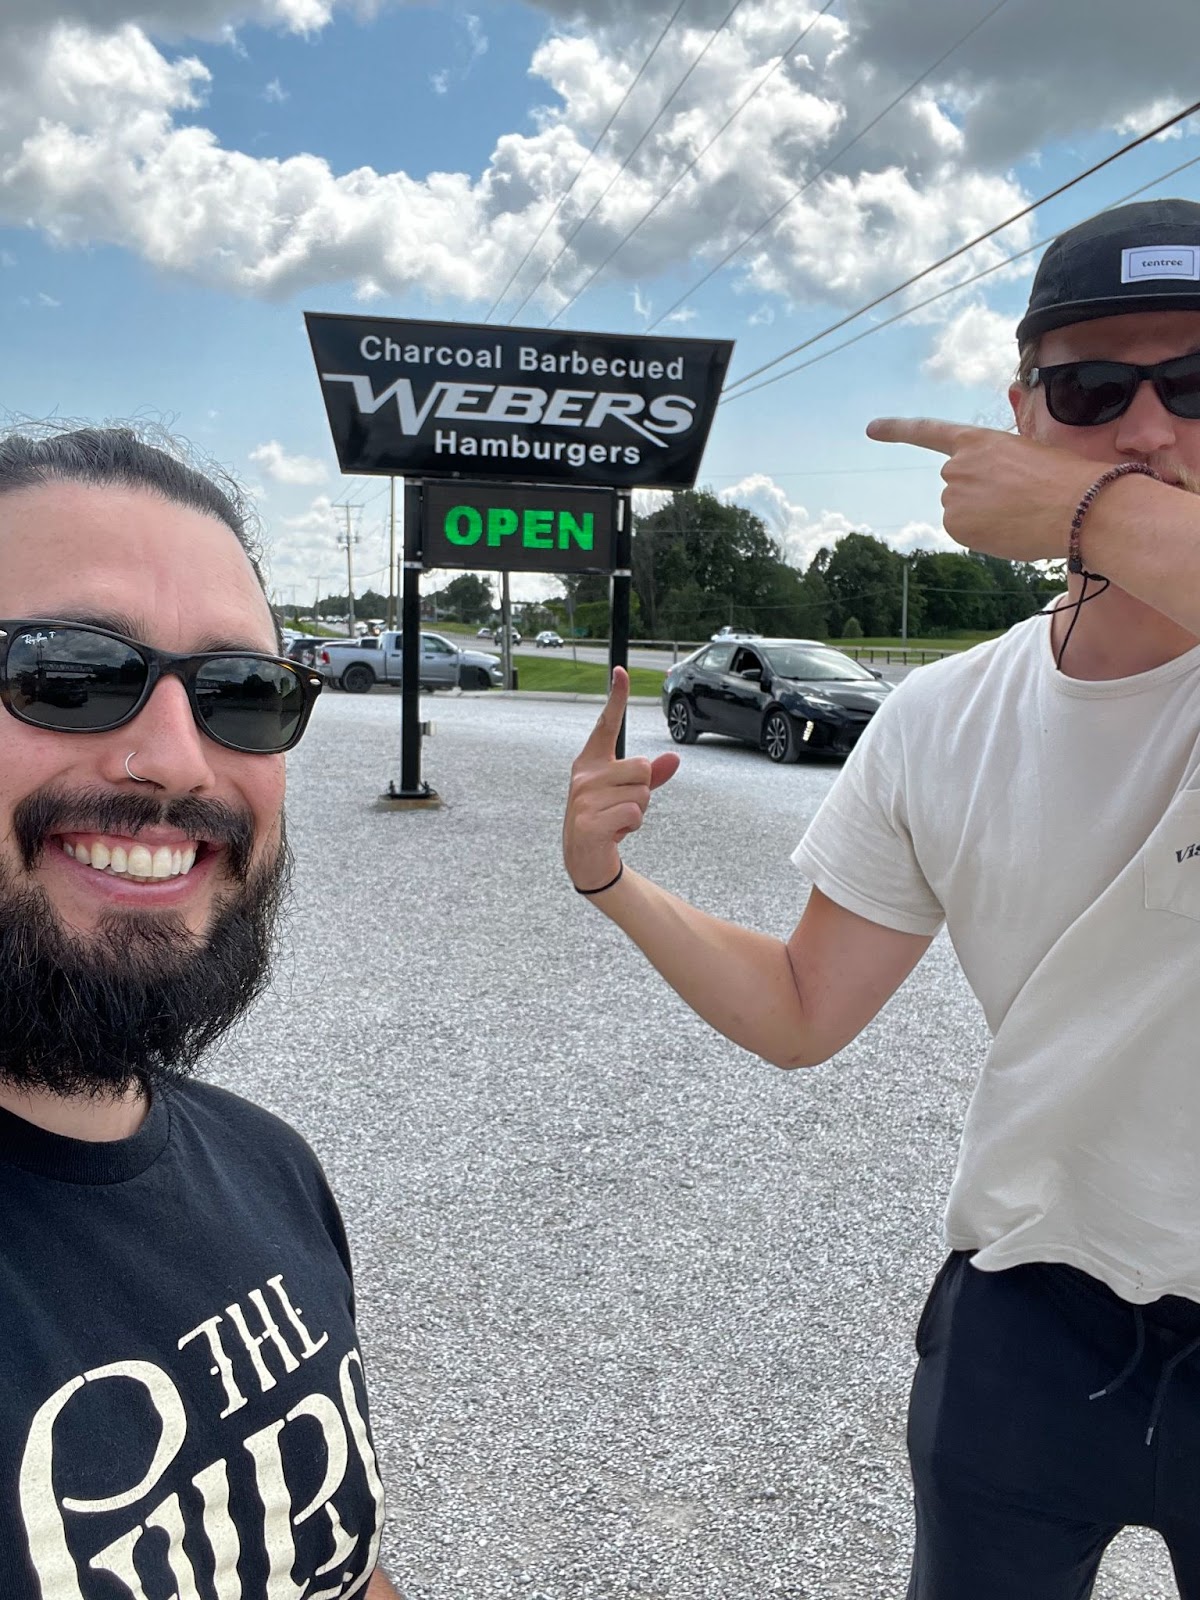 two people smiling and pointing at a roadside sign that reads "Charcoal Barbequed Webers Hamburgers, Open"